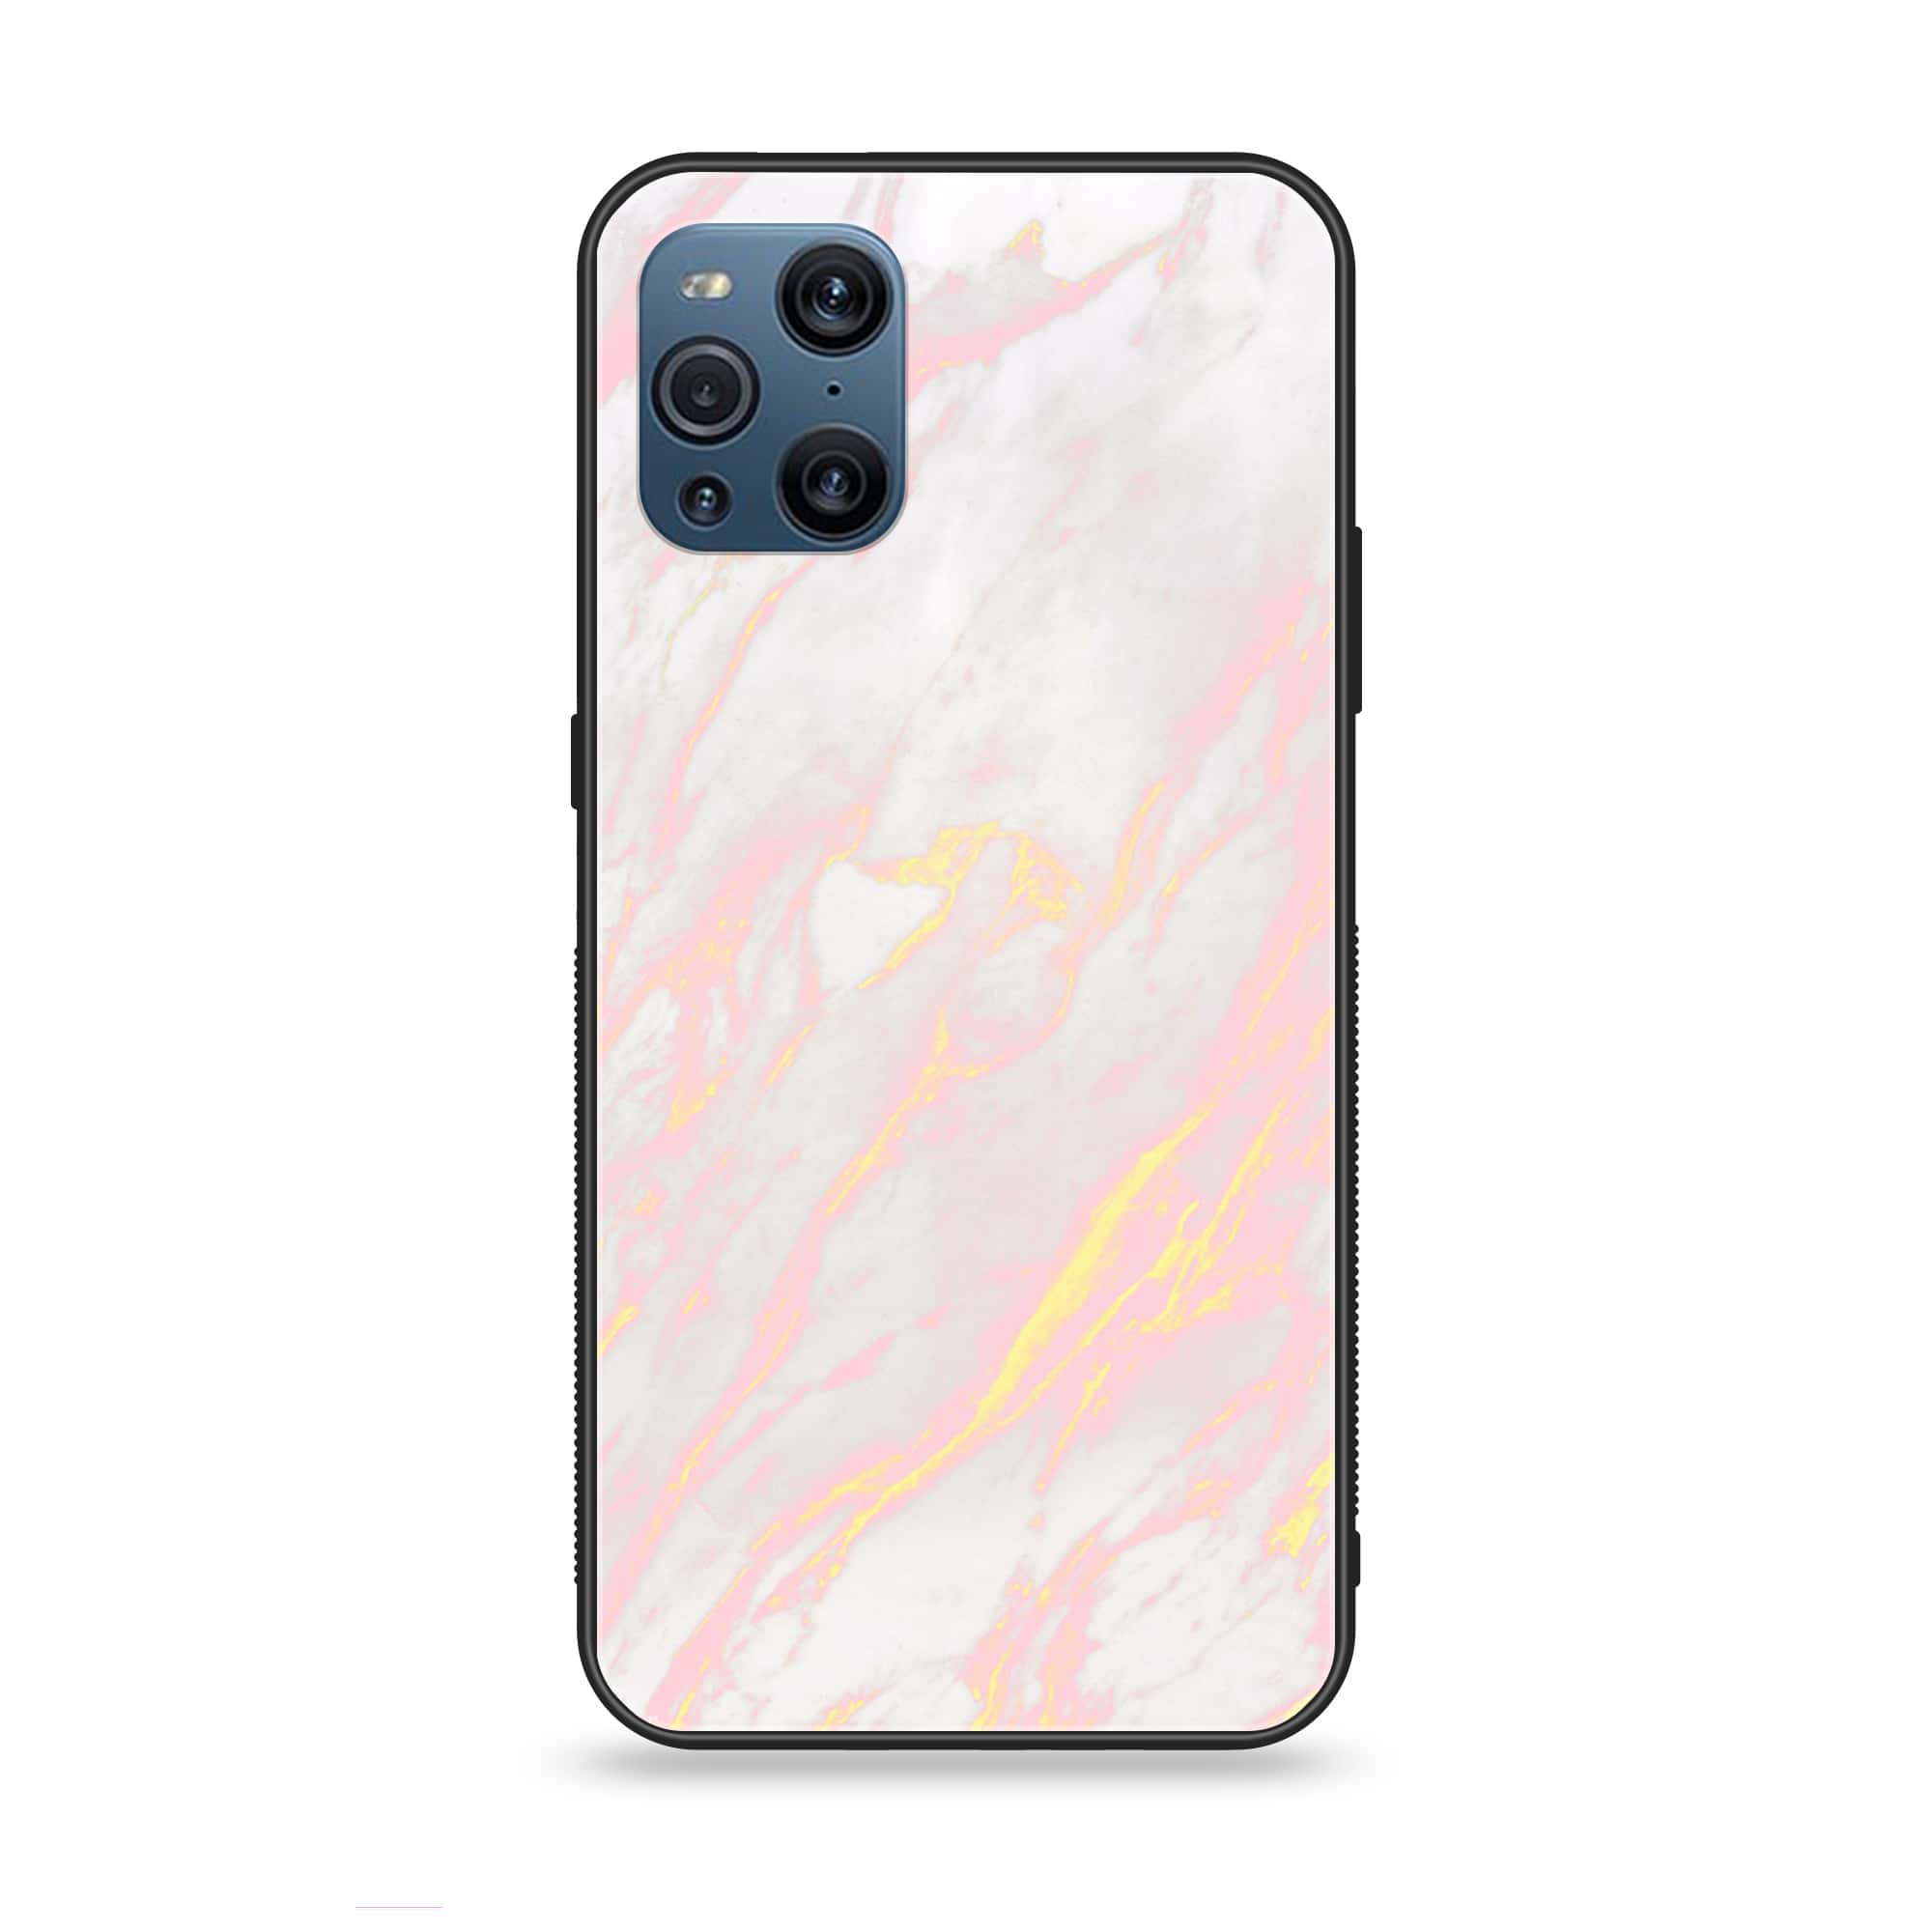 Oppo Find X3 - Pink Marble Series - Premium Printed Glass soft Bumper shock Proof Case